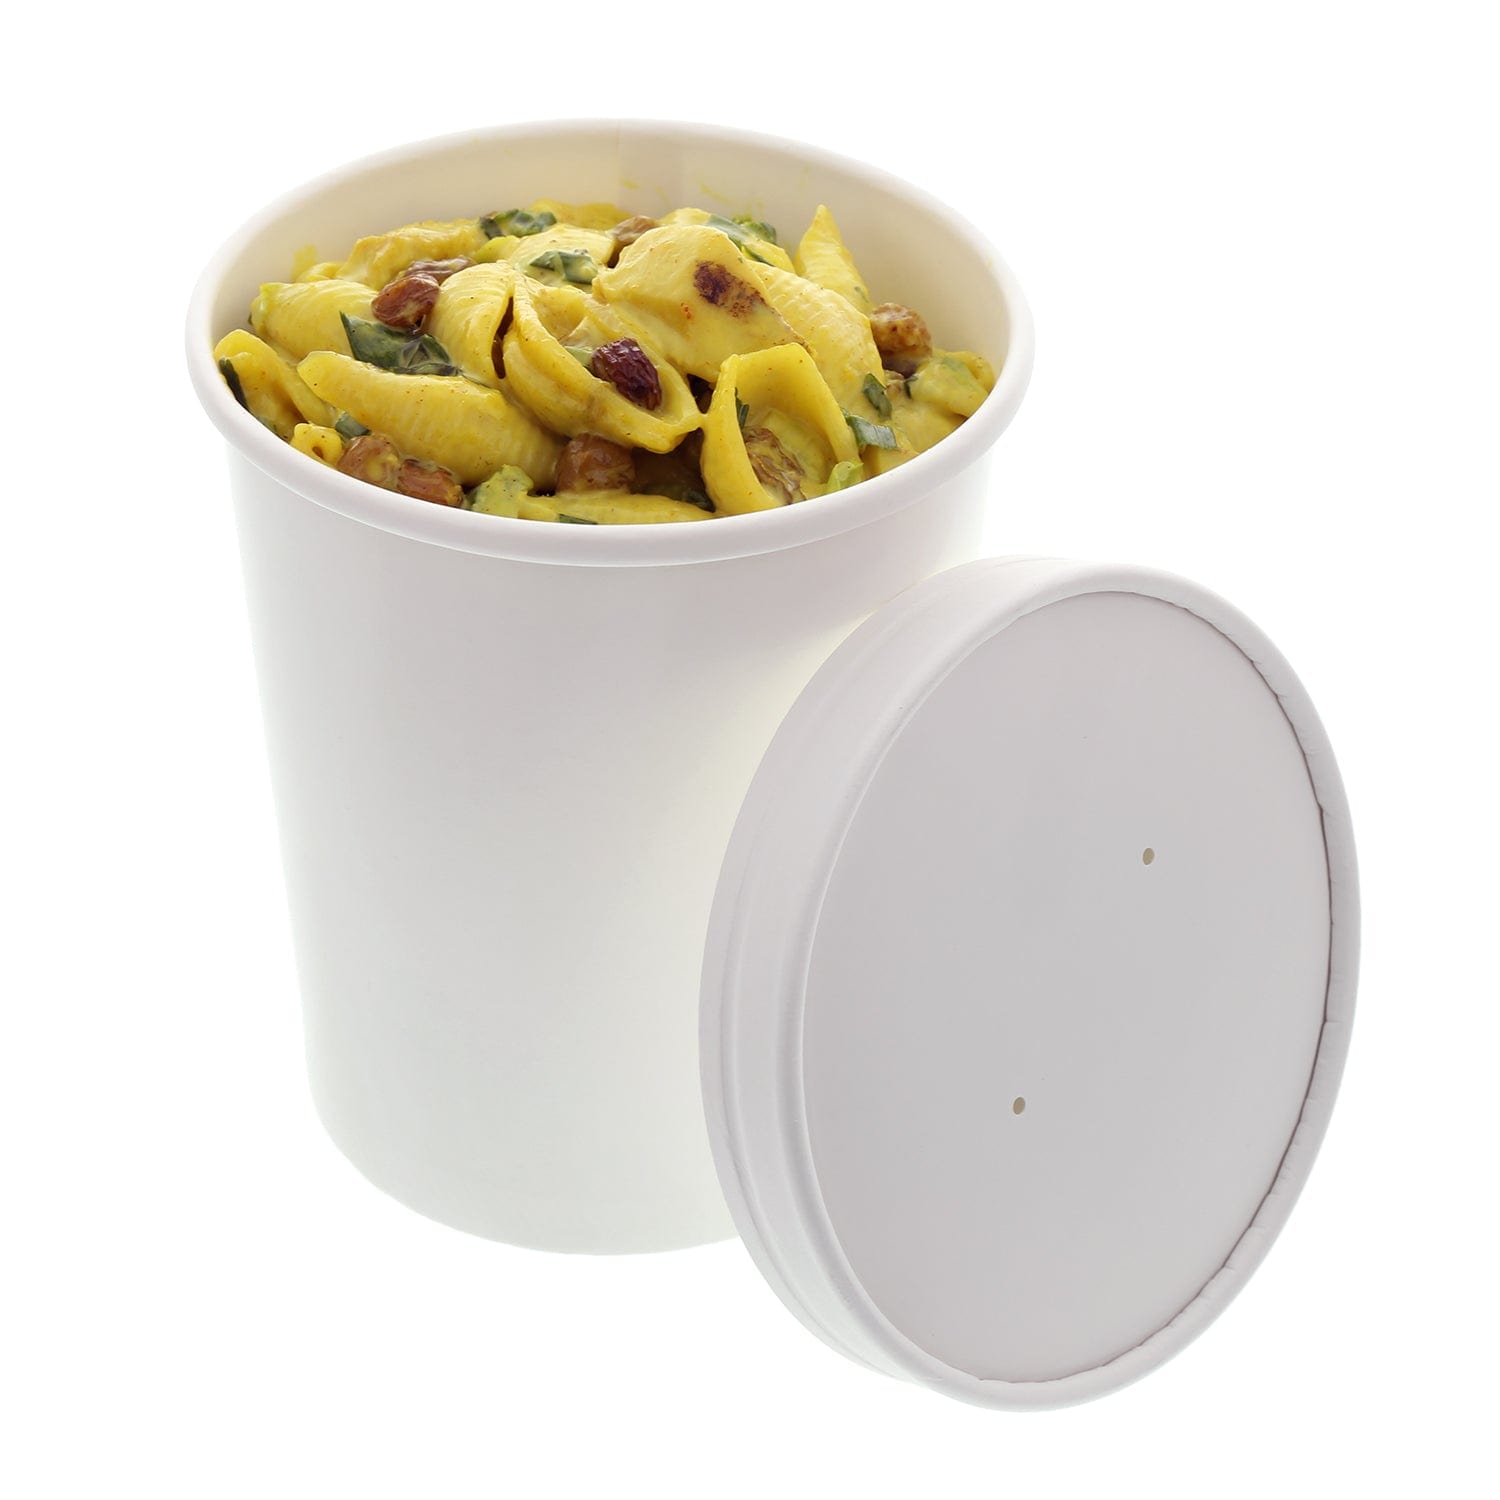 32 OZ KRAFT PAPER FOOD CONTAINER AND LID COMBO, 1/250 – AmerCareRoyal